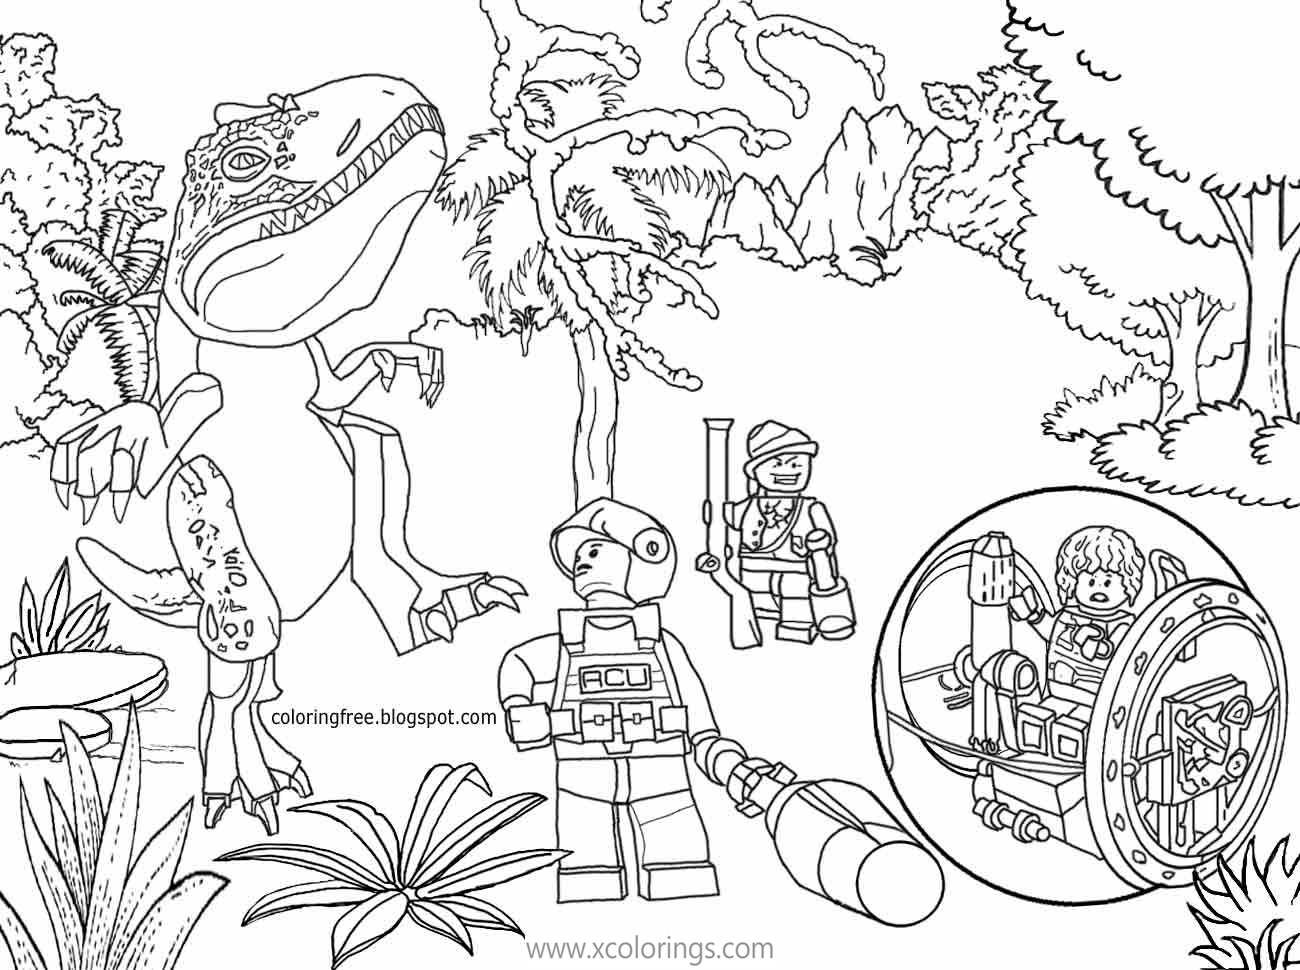 LEGO Jurassic World Coloring Pages Tyrannosaurus Dinosaurs - XColorings.com